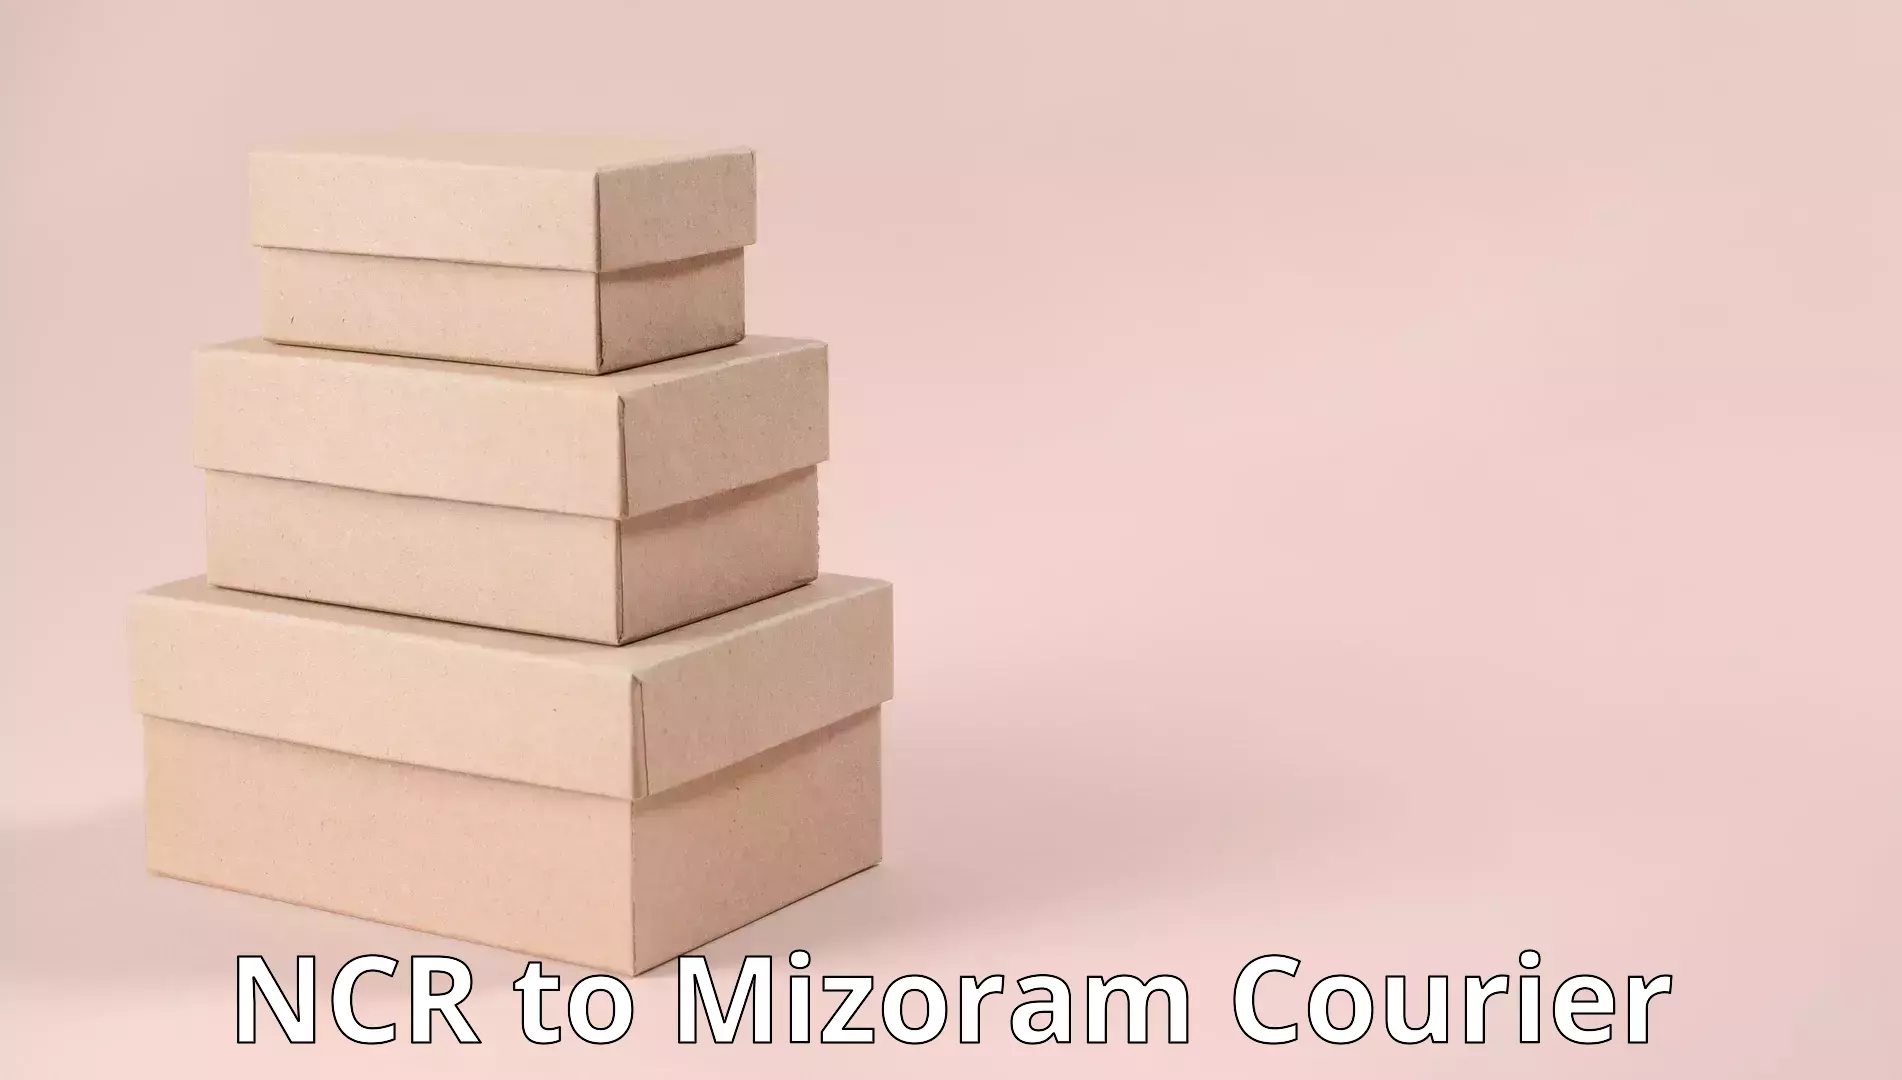 Moving and packing experts NCR to Mizoram